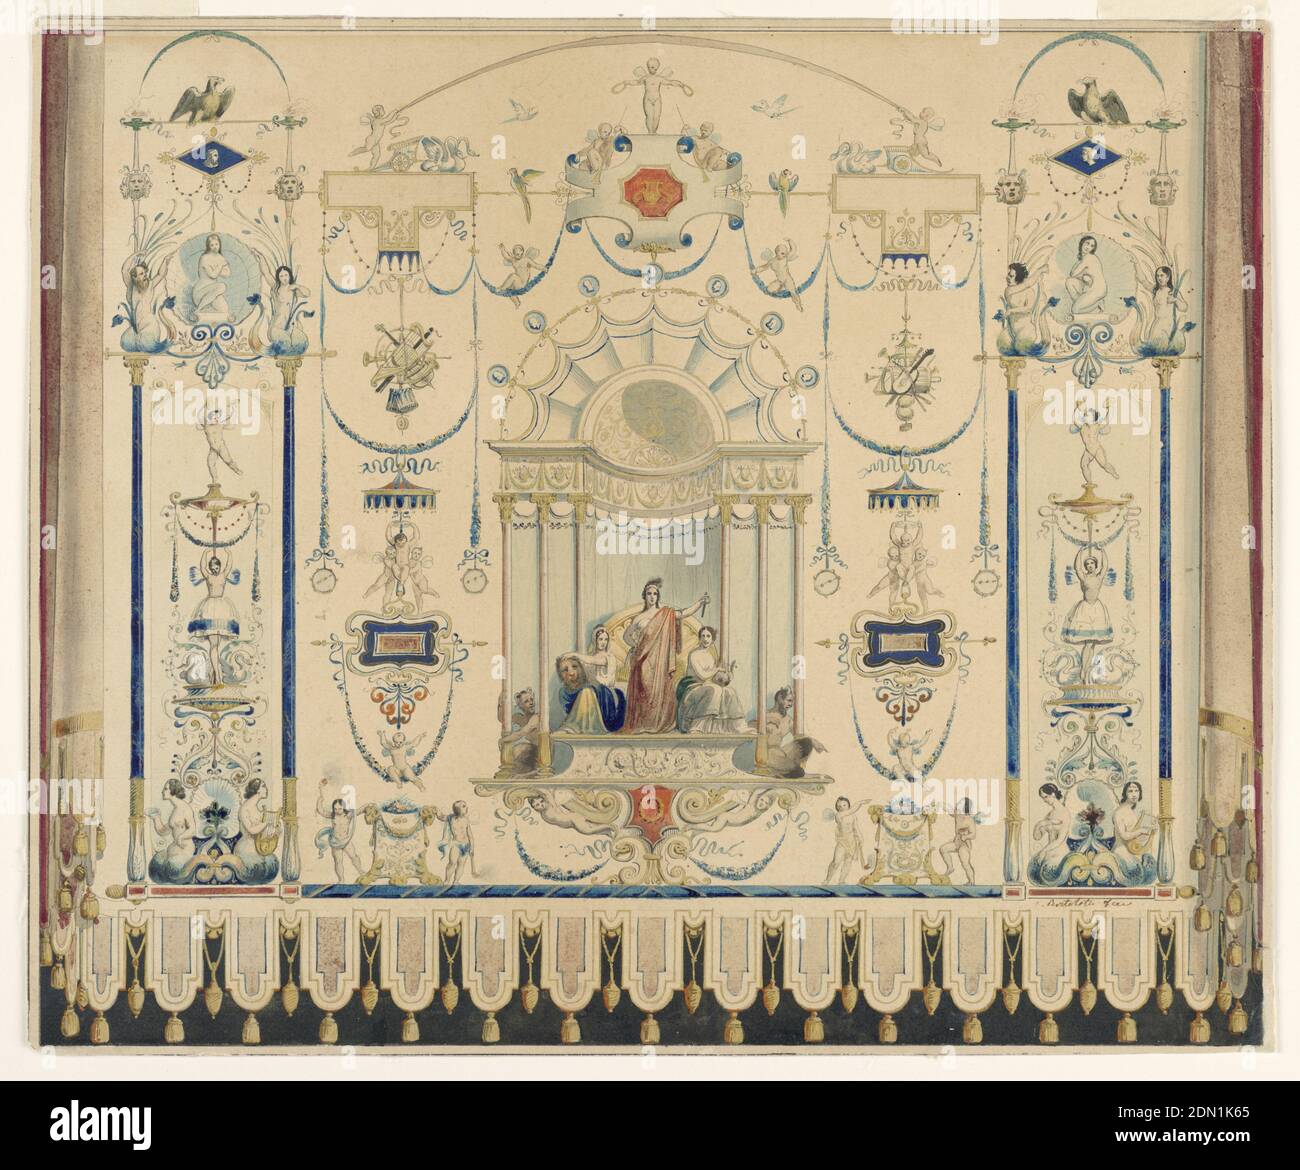 Design for a Theater Curtain, V. Bertolotti, active 1850–1860, Pen and black, blue ink, brush and watercolor, gouache, gold paint, graphite on wove paper, Horizontal format. Designs in the grotesque style. An exedra forms the central motif in which a woman with a dagger, probably 'Tragedy,' stands between two seated women; the left one holds a bloody bearded head, the right one plays a lyre. Two satyrs crouch at the outside., Italy, mid-19th century, theater, Drawing Stock Photo